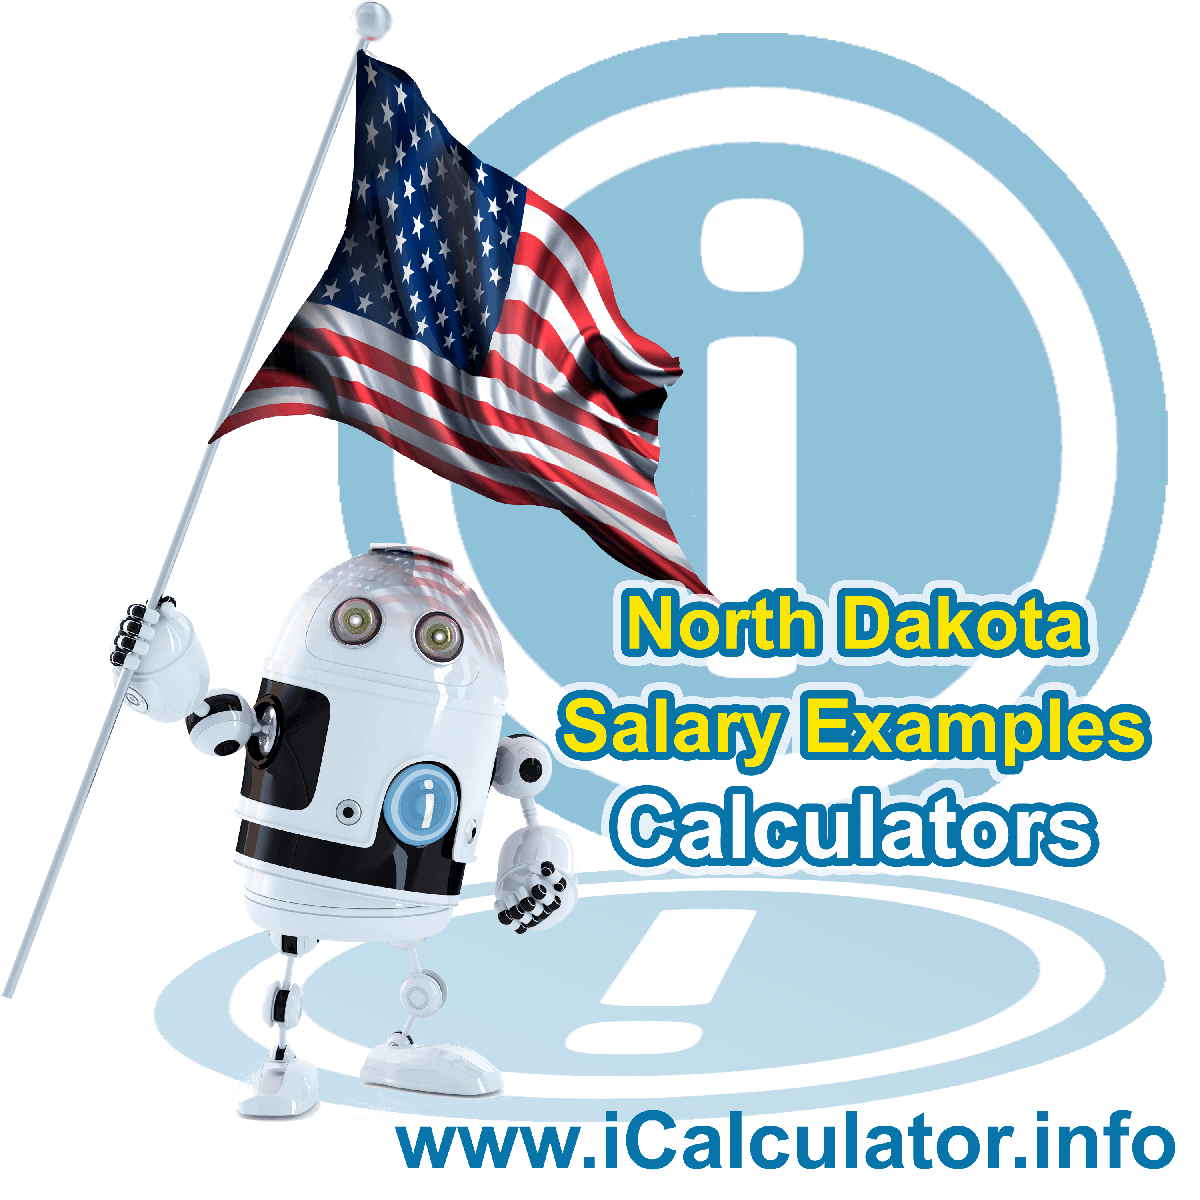 North Dakota Salary Example for $ 270,000.00 in 2023 | iCalculator™ | $ 270,000.00 salary example for employee and employer paying North Dakota State tincome taxes. Detailed salary after tax calculation including North Dakota State Tax, Federal State Tax, Medicare Deductions, Social Security, Capital Gains and other income tax and salary deductions complete with supporting North Dakota state tax tables 